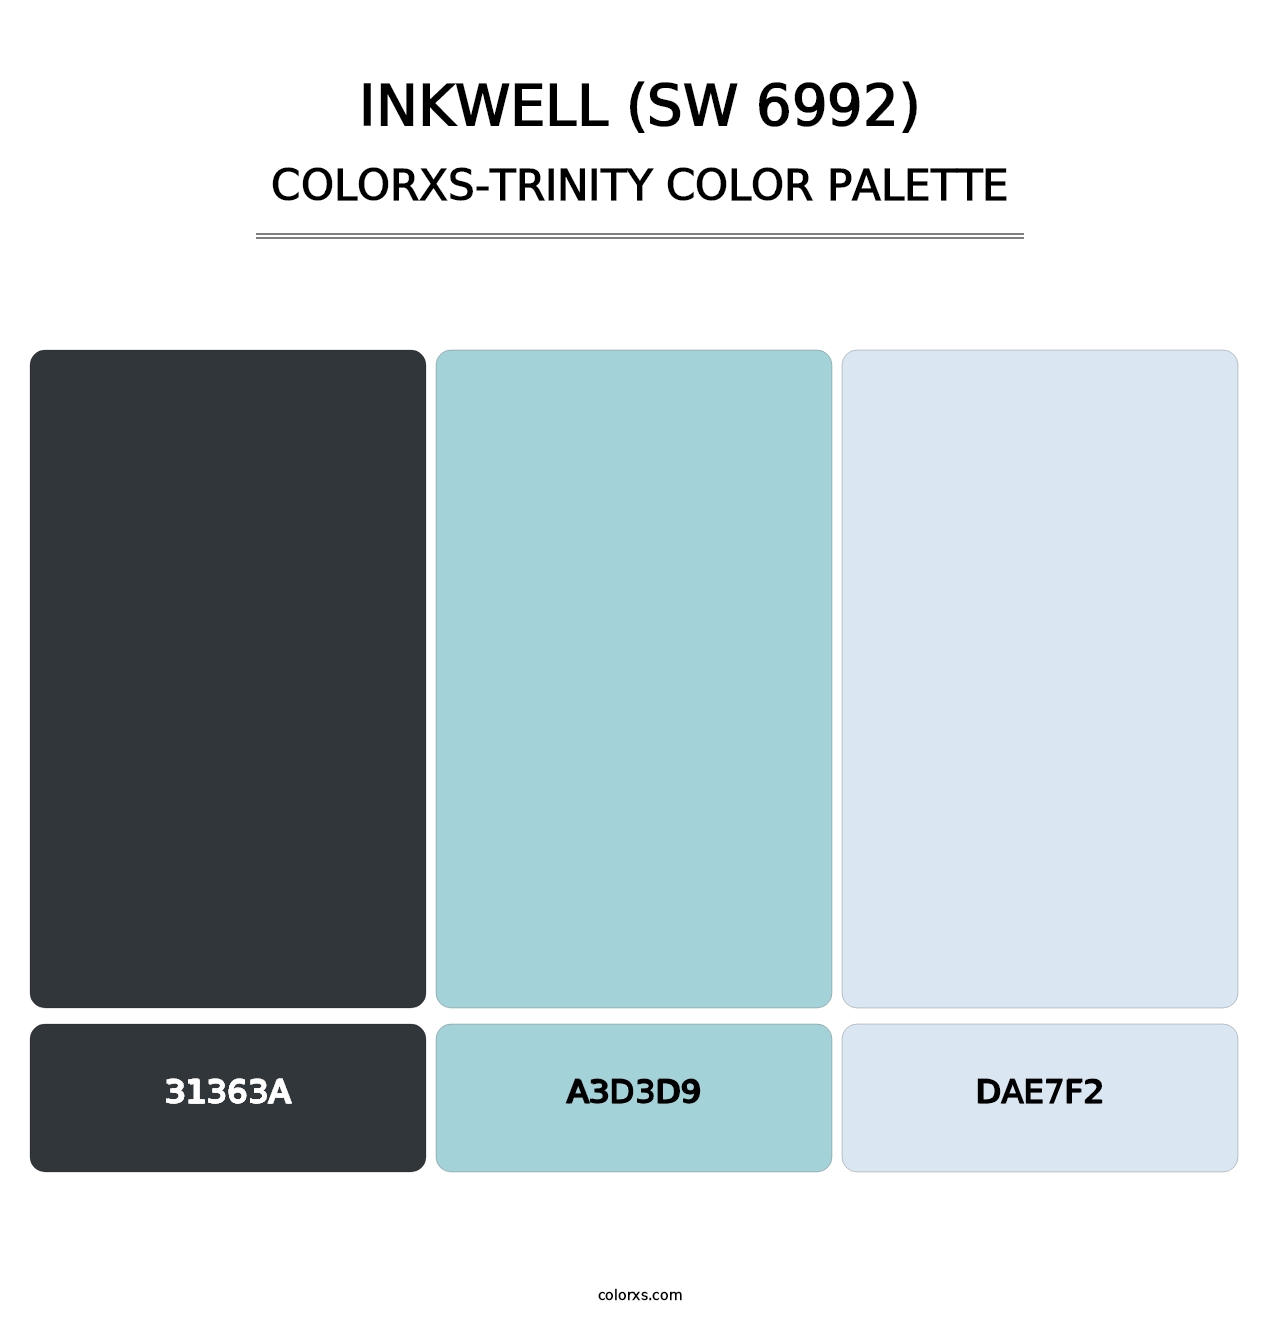 Inkwell (SW 6992) - Colorxs Trinity Palette